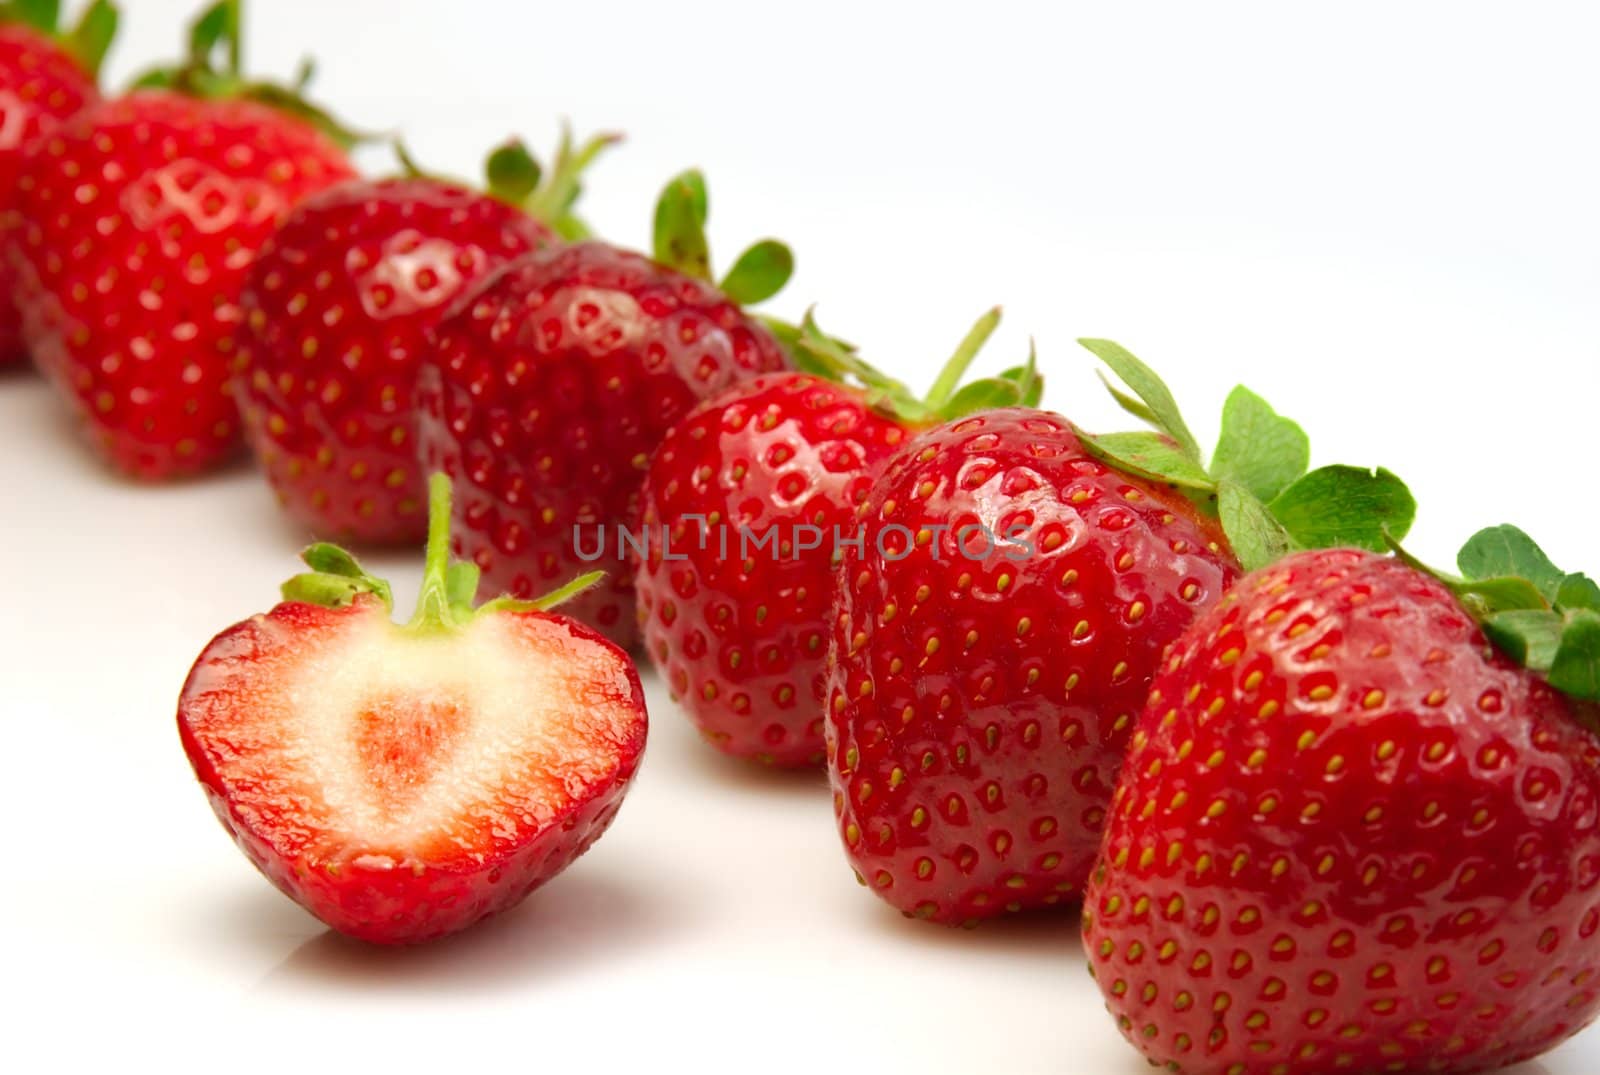 Shot of a pile of fresh strawberries by anki21